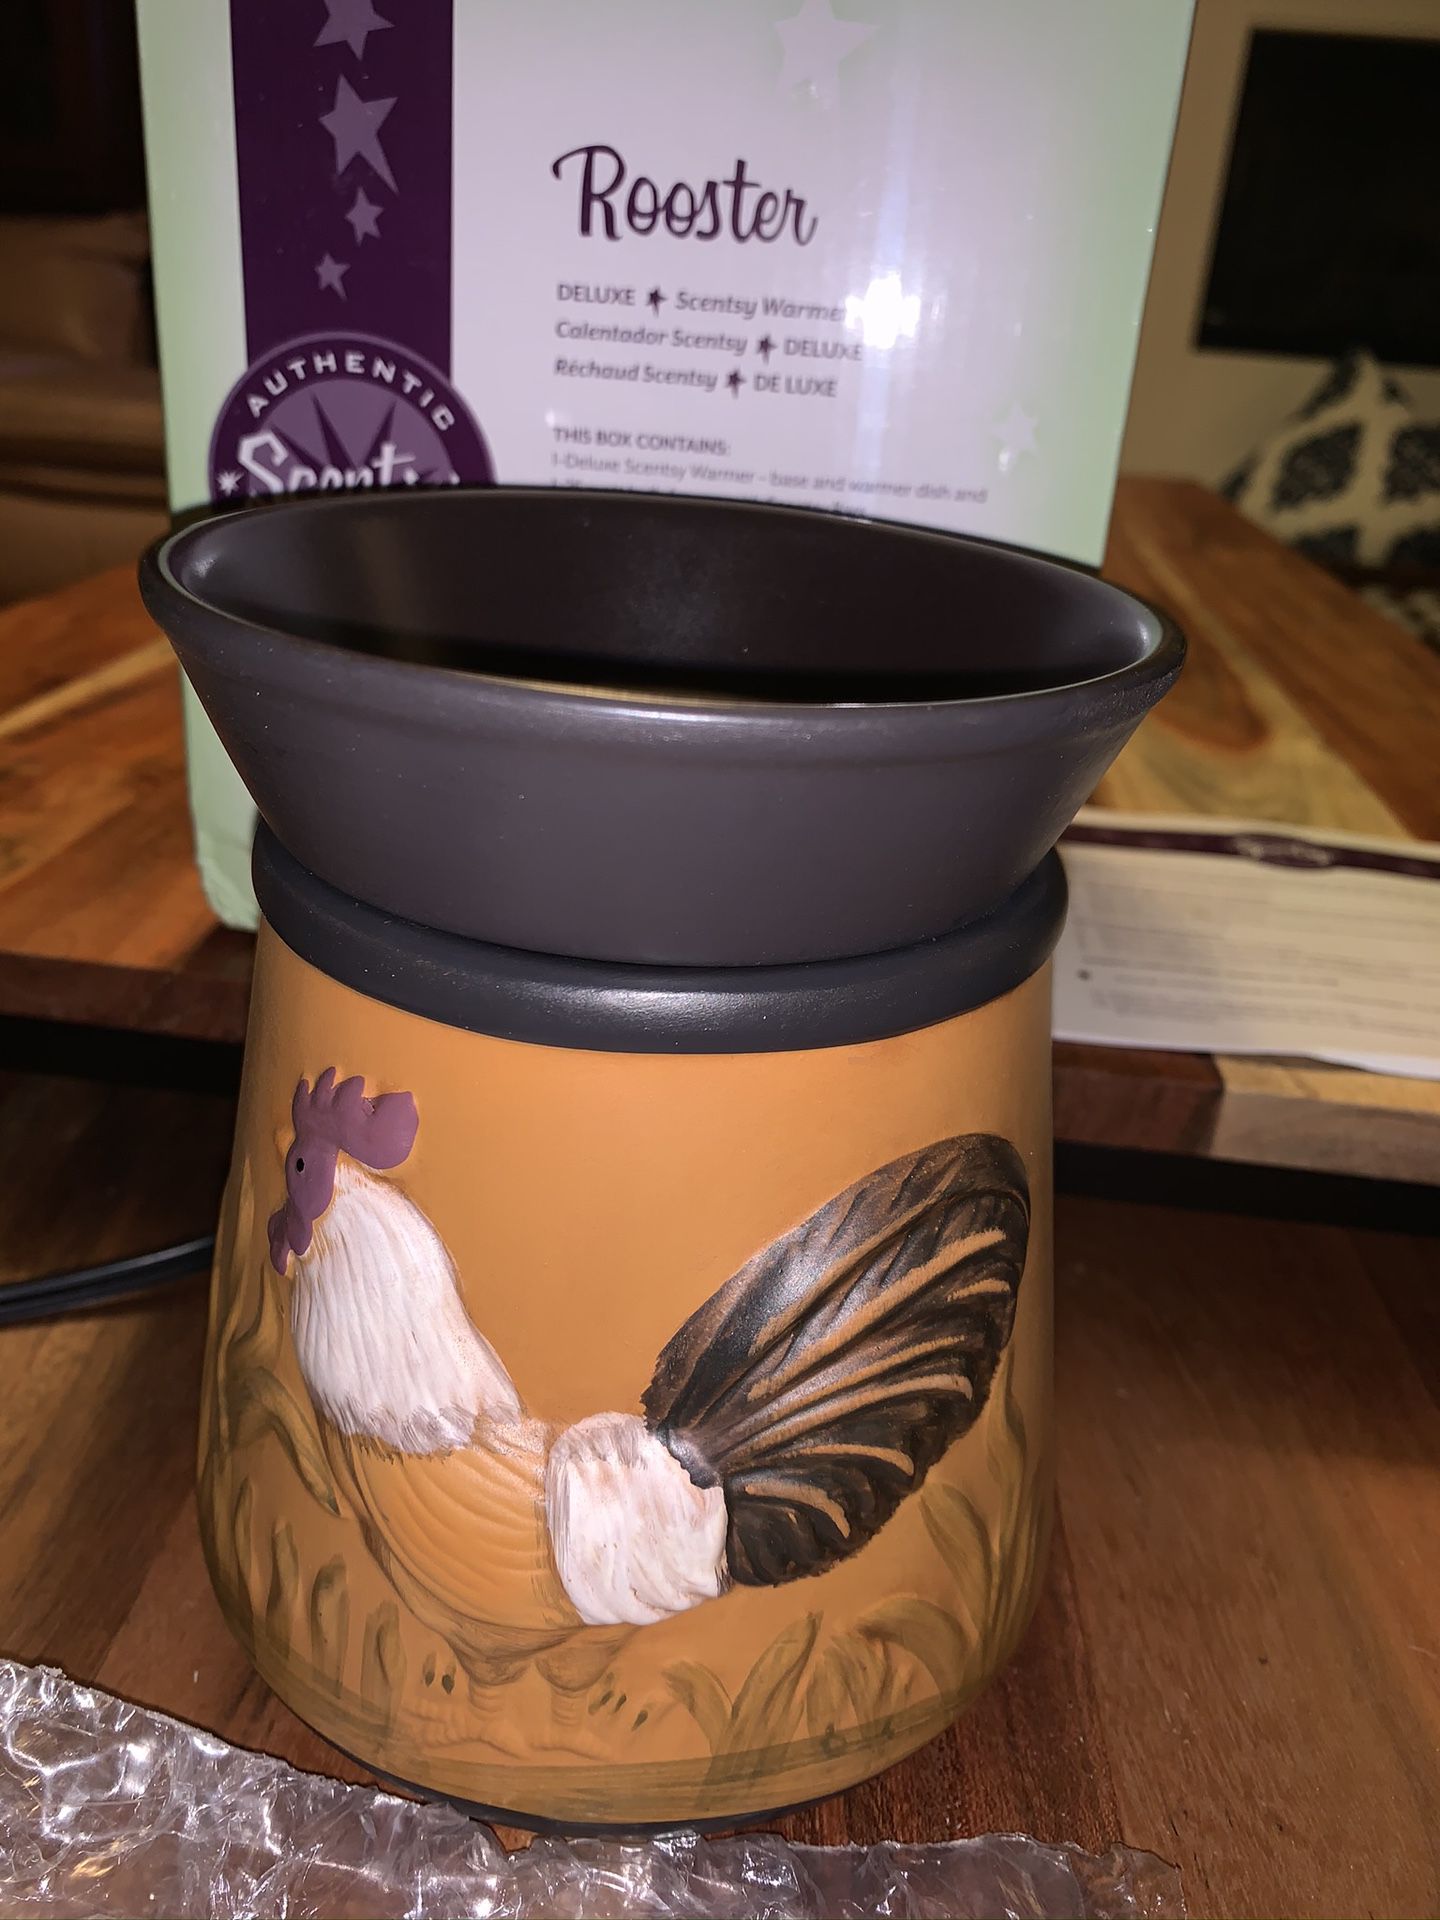 New Scentsy warmers